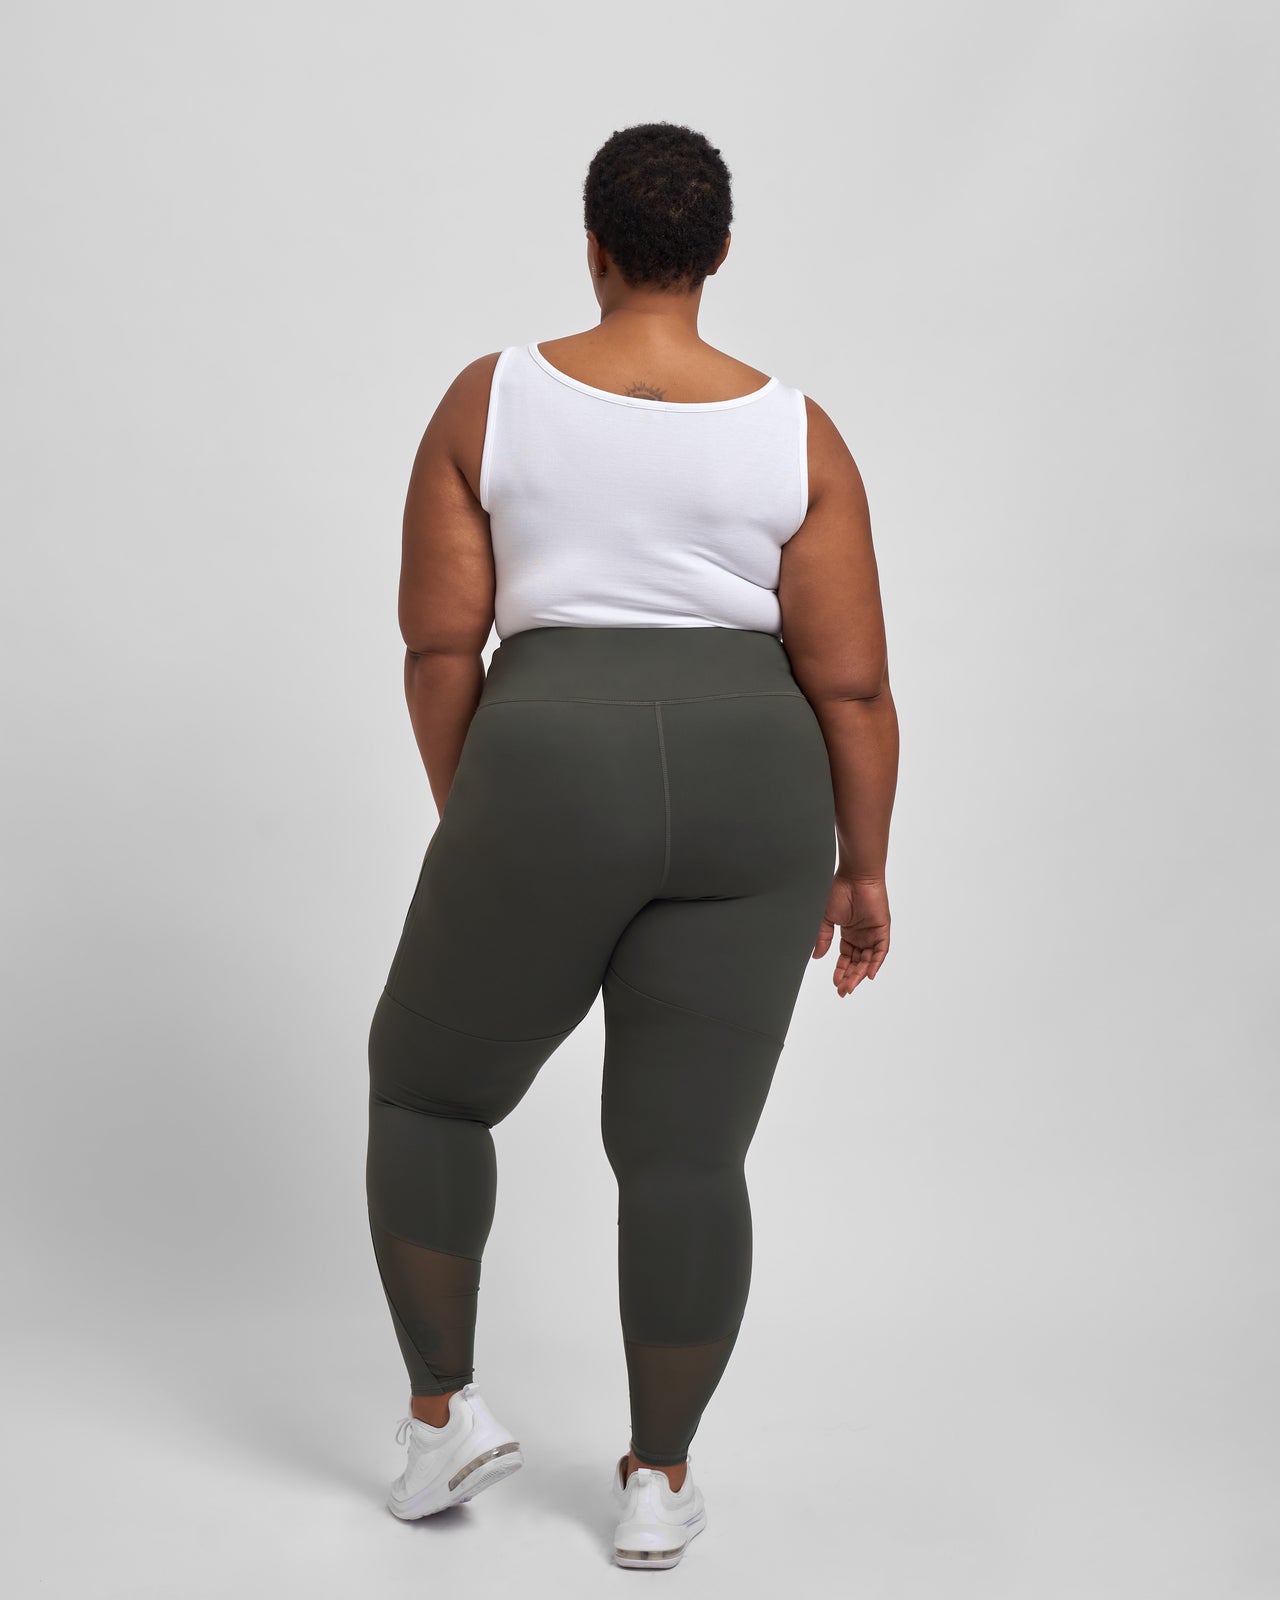 3 plus-size leggings that don't fall down in sizes 1X to 5X